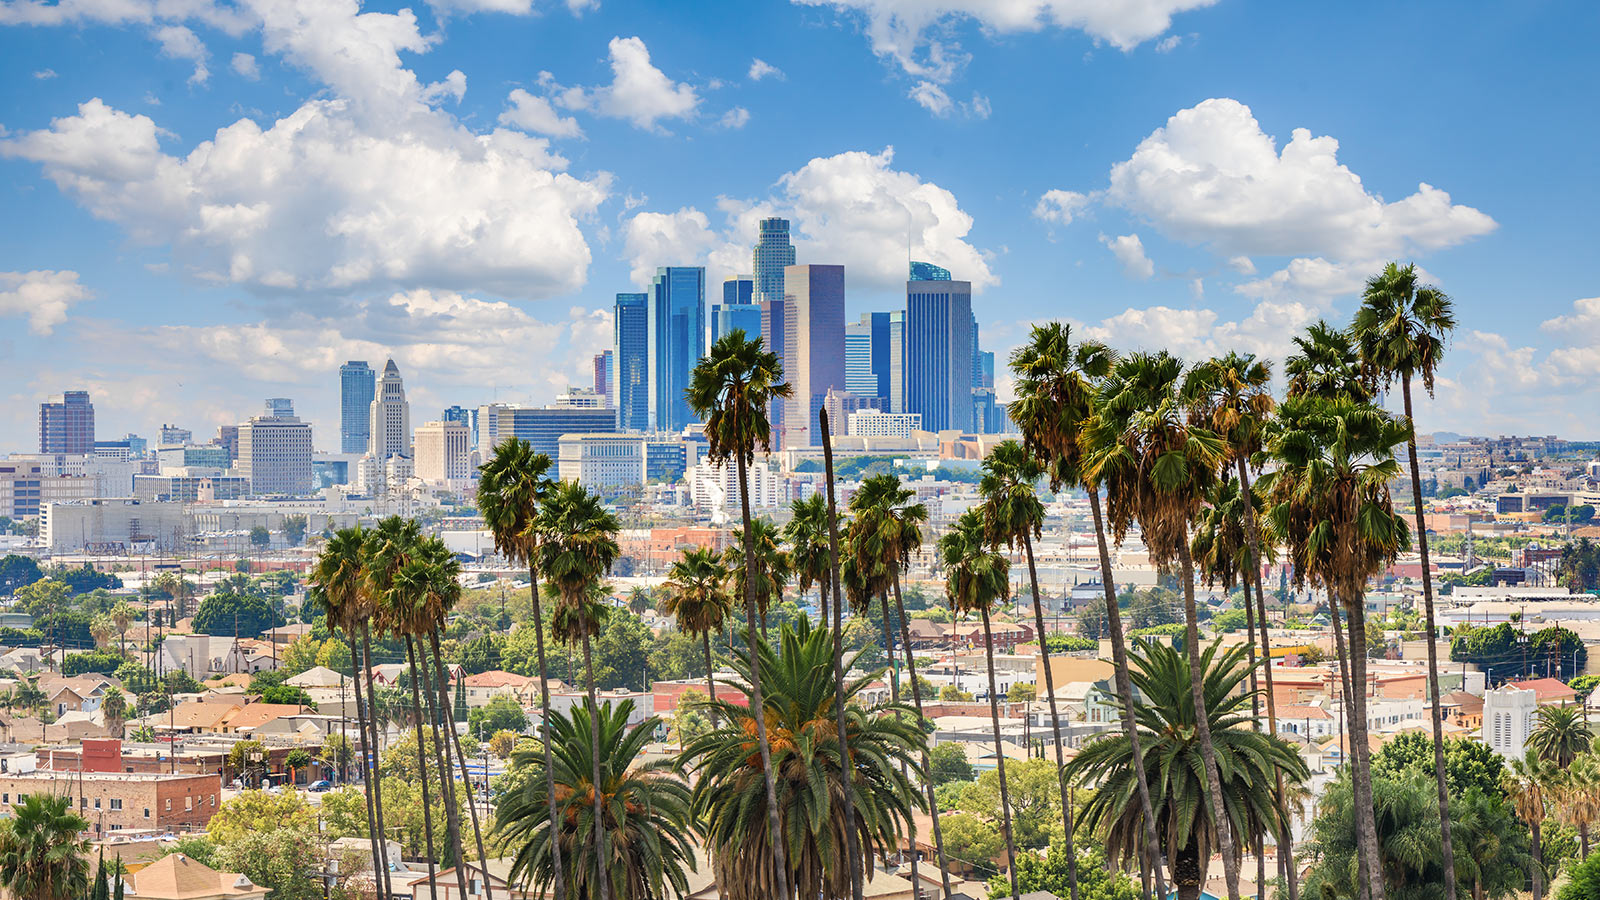 Beautiful cloudy day of Los Angeles downtown skyline and palm trees in foreground